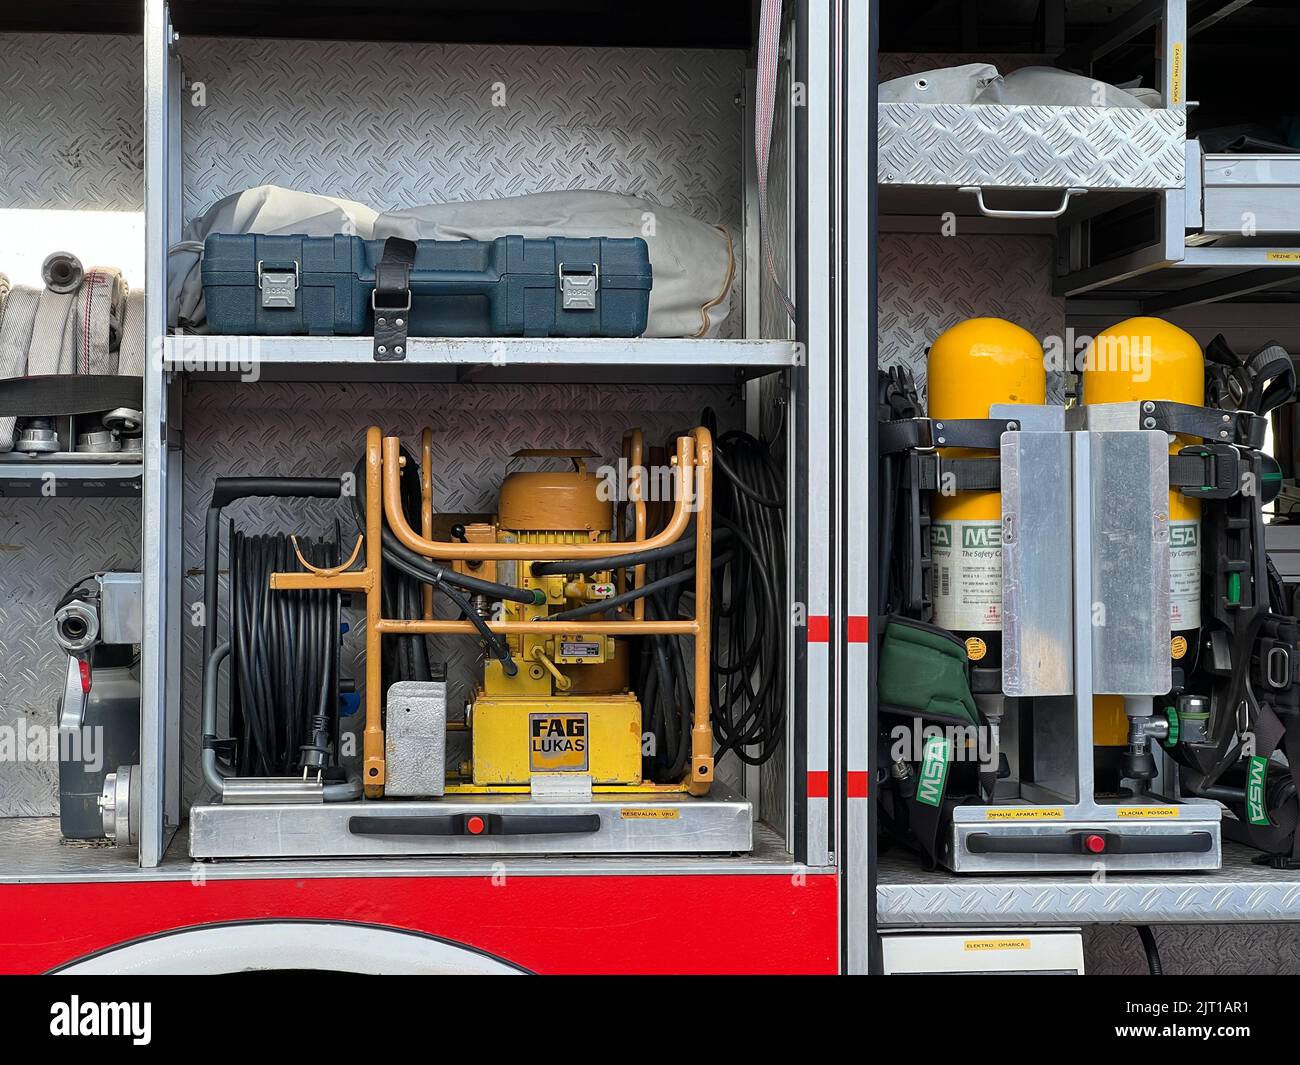 Budva, Montenegro - 01.08.22: Equipment for extinguishing fires in a fire engine. Close-up Stock Photo